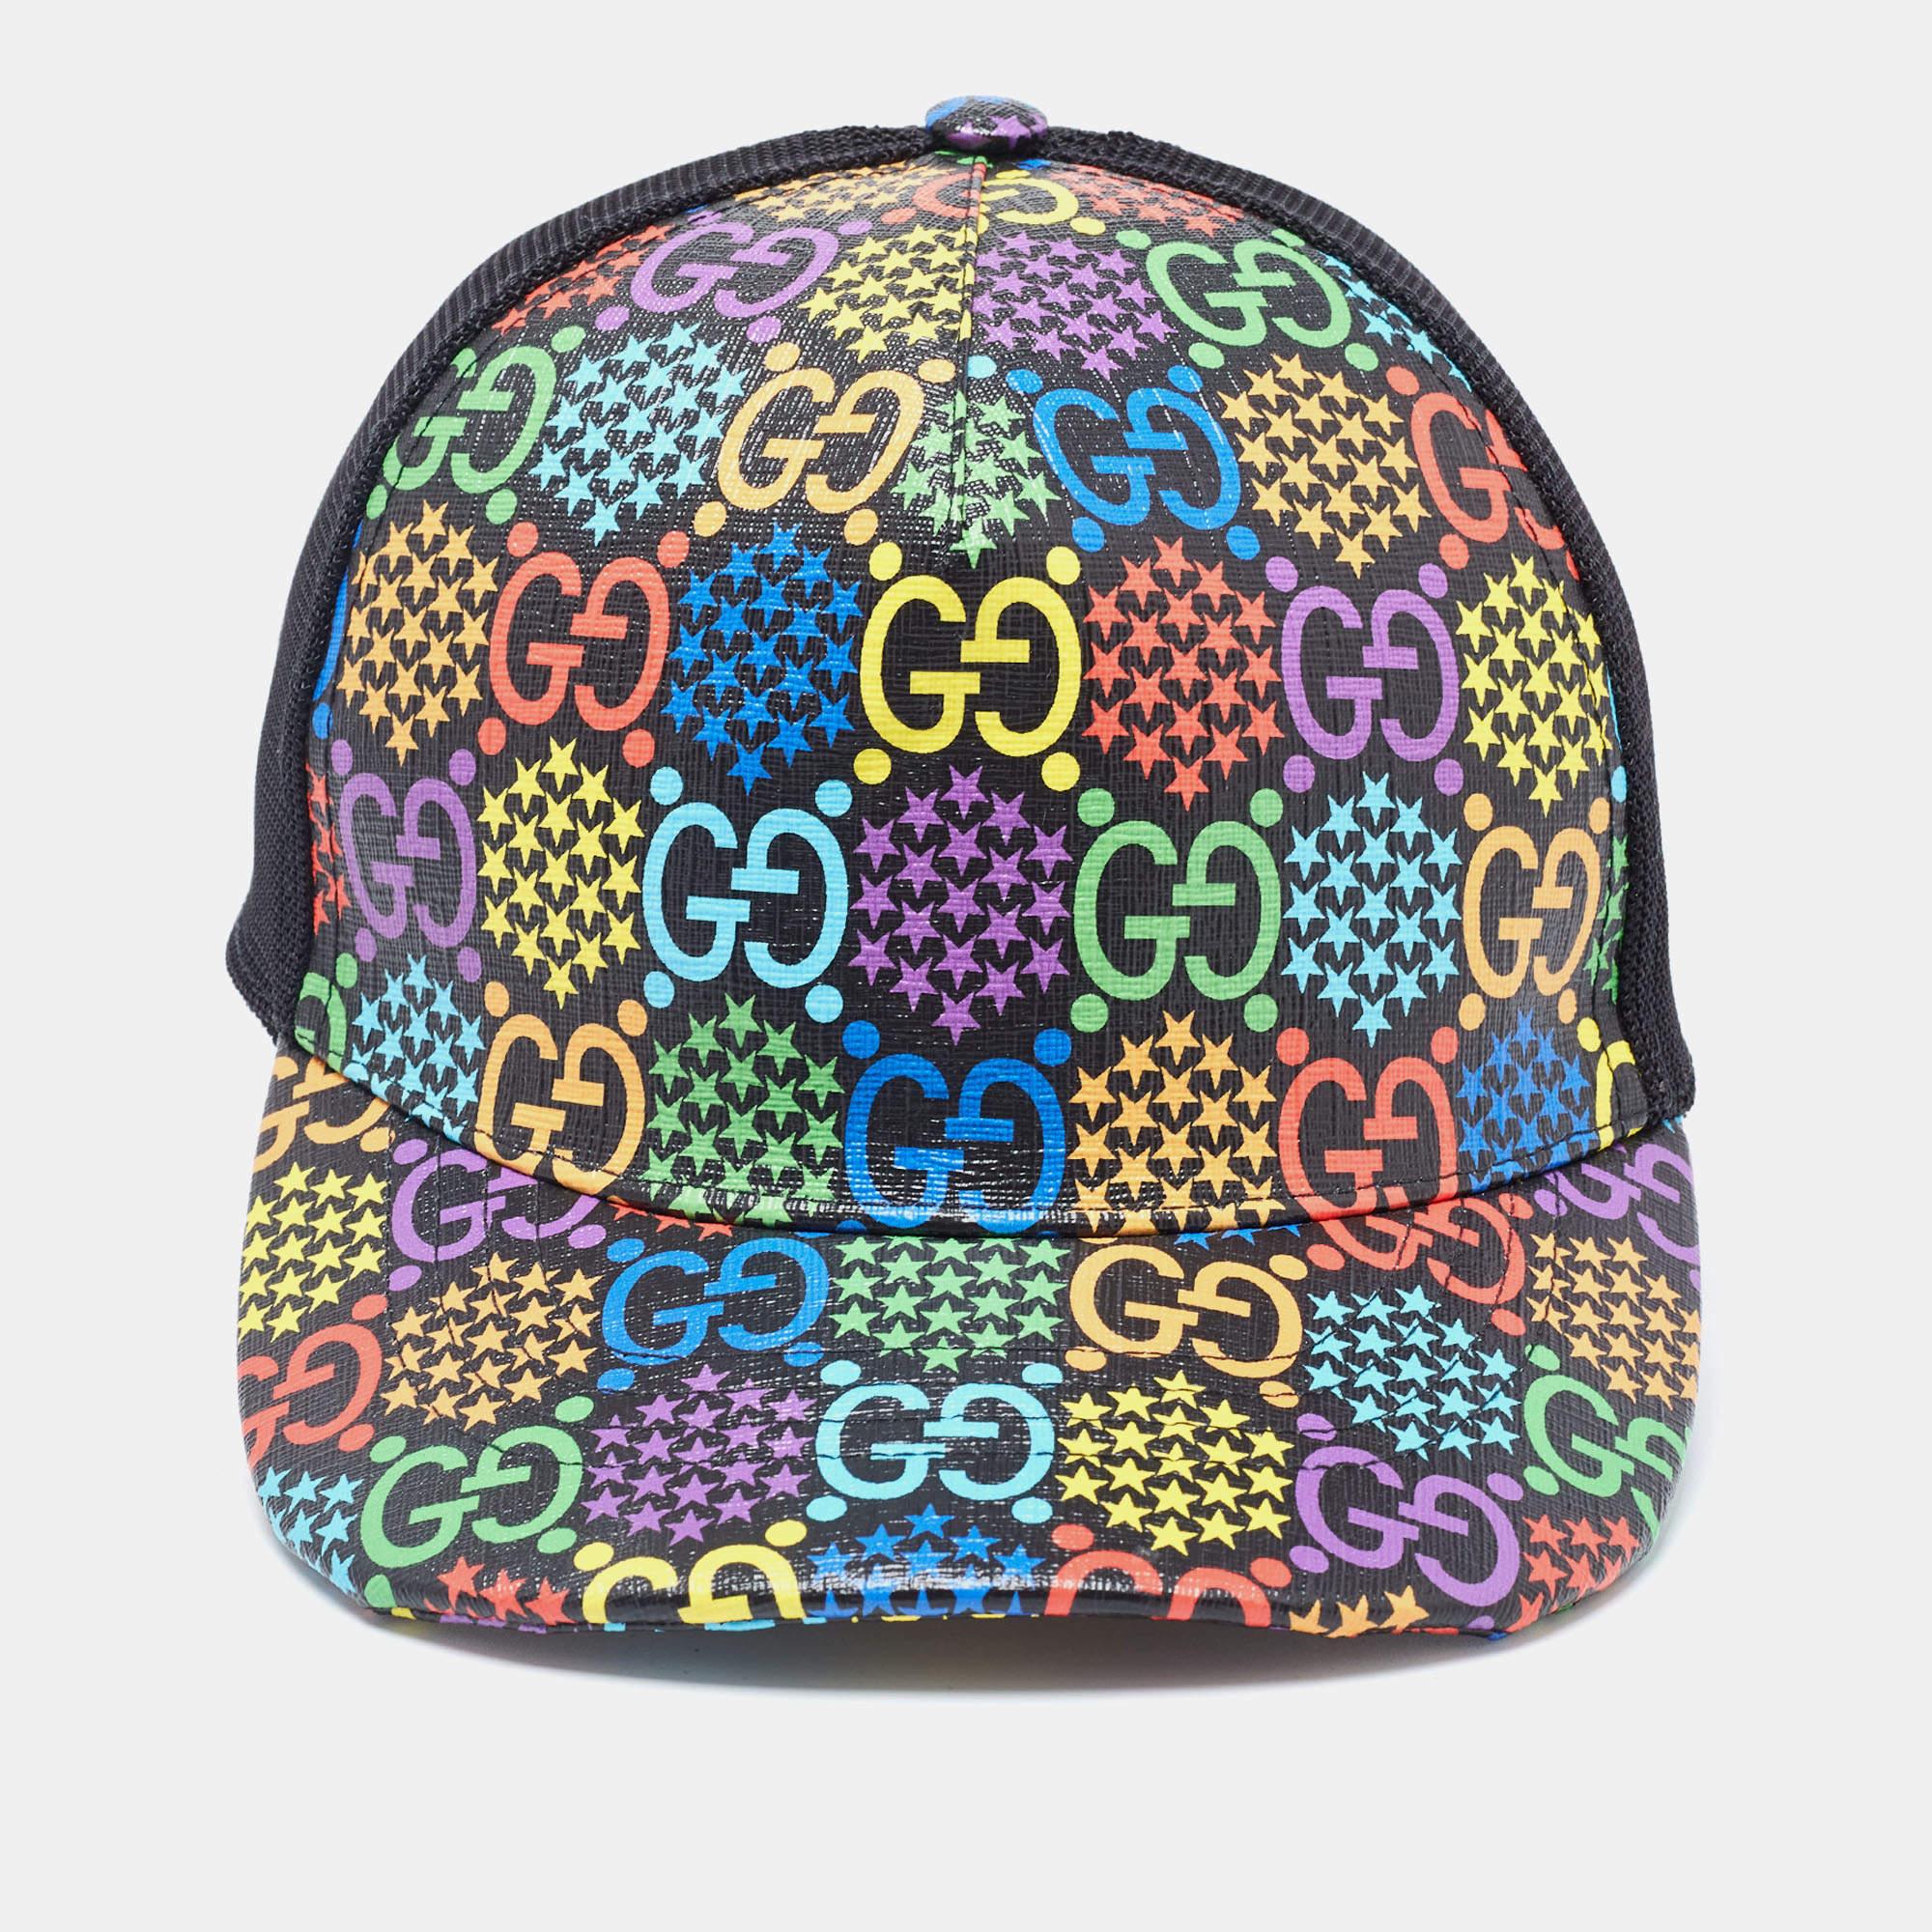 Baseball caps are perfect for sunny days, game days, or just to complete a casual outfit. This Gucci piece is made from GG canvas and black mesh.

